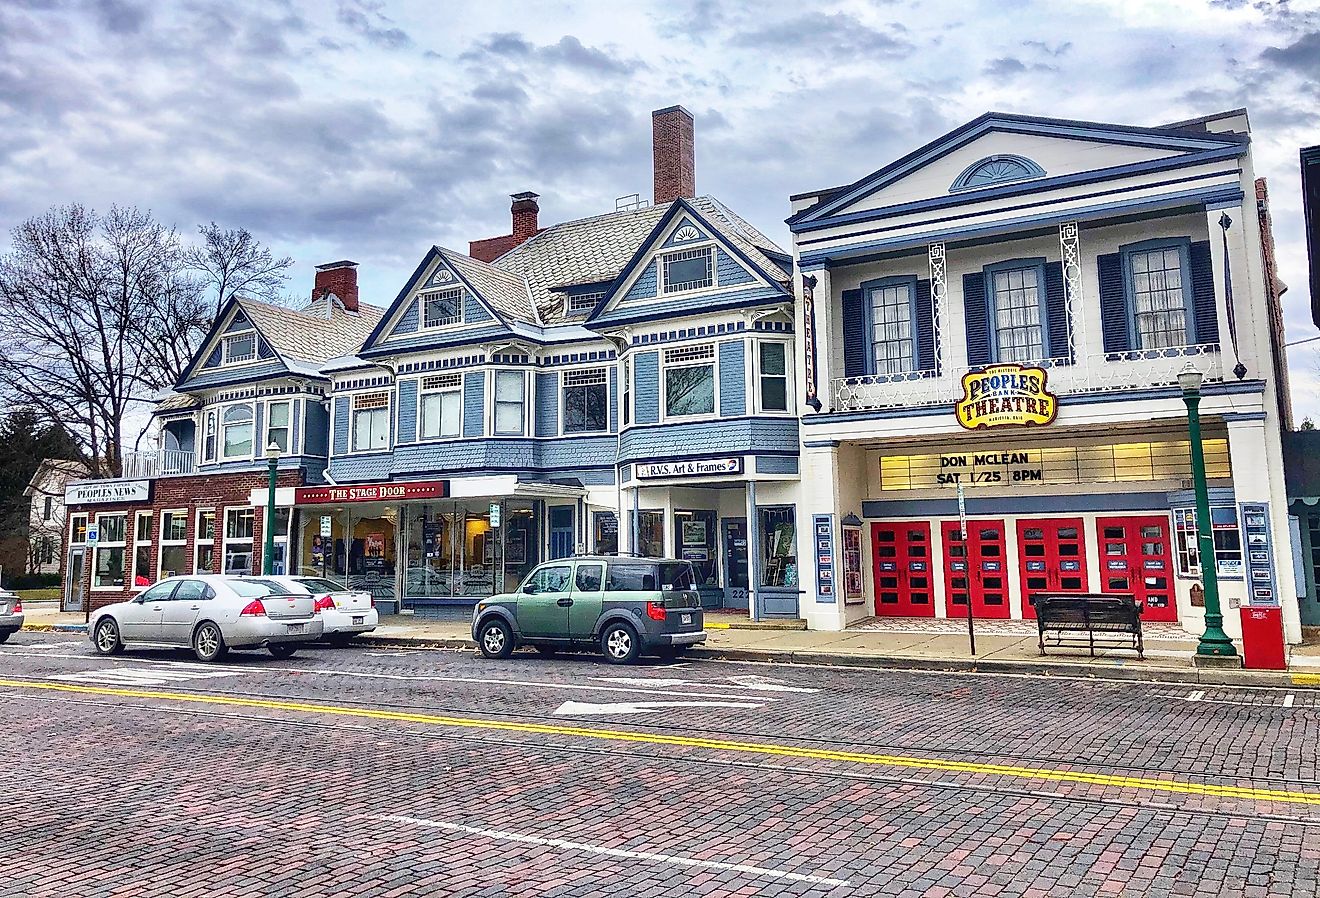 Downtown Marietta with cars parked at curb and the People’s Bank Theatre seen prominently. Image credit Wendy van Overstreet via Shutterstock